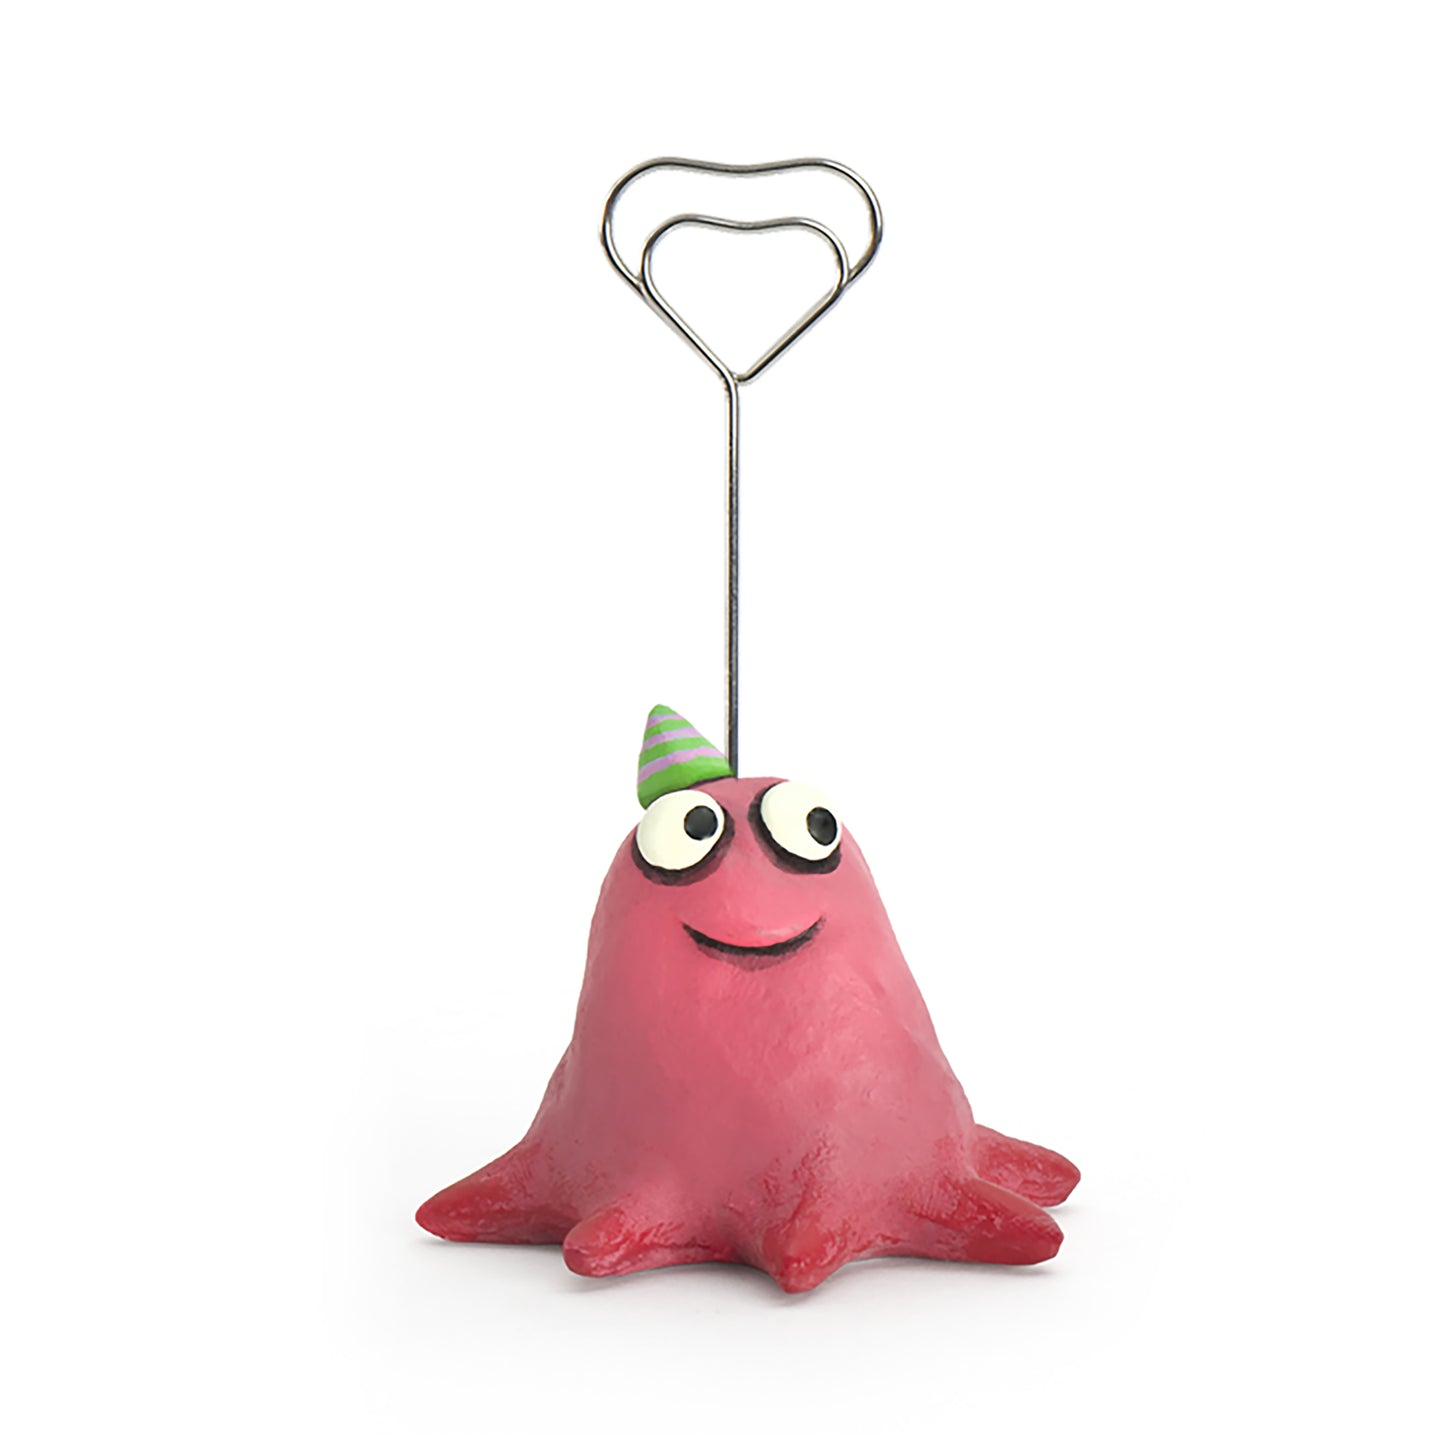 Whoopee the Party Blob - Comes with 2 greeting cards!